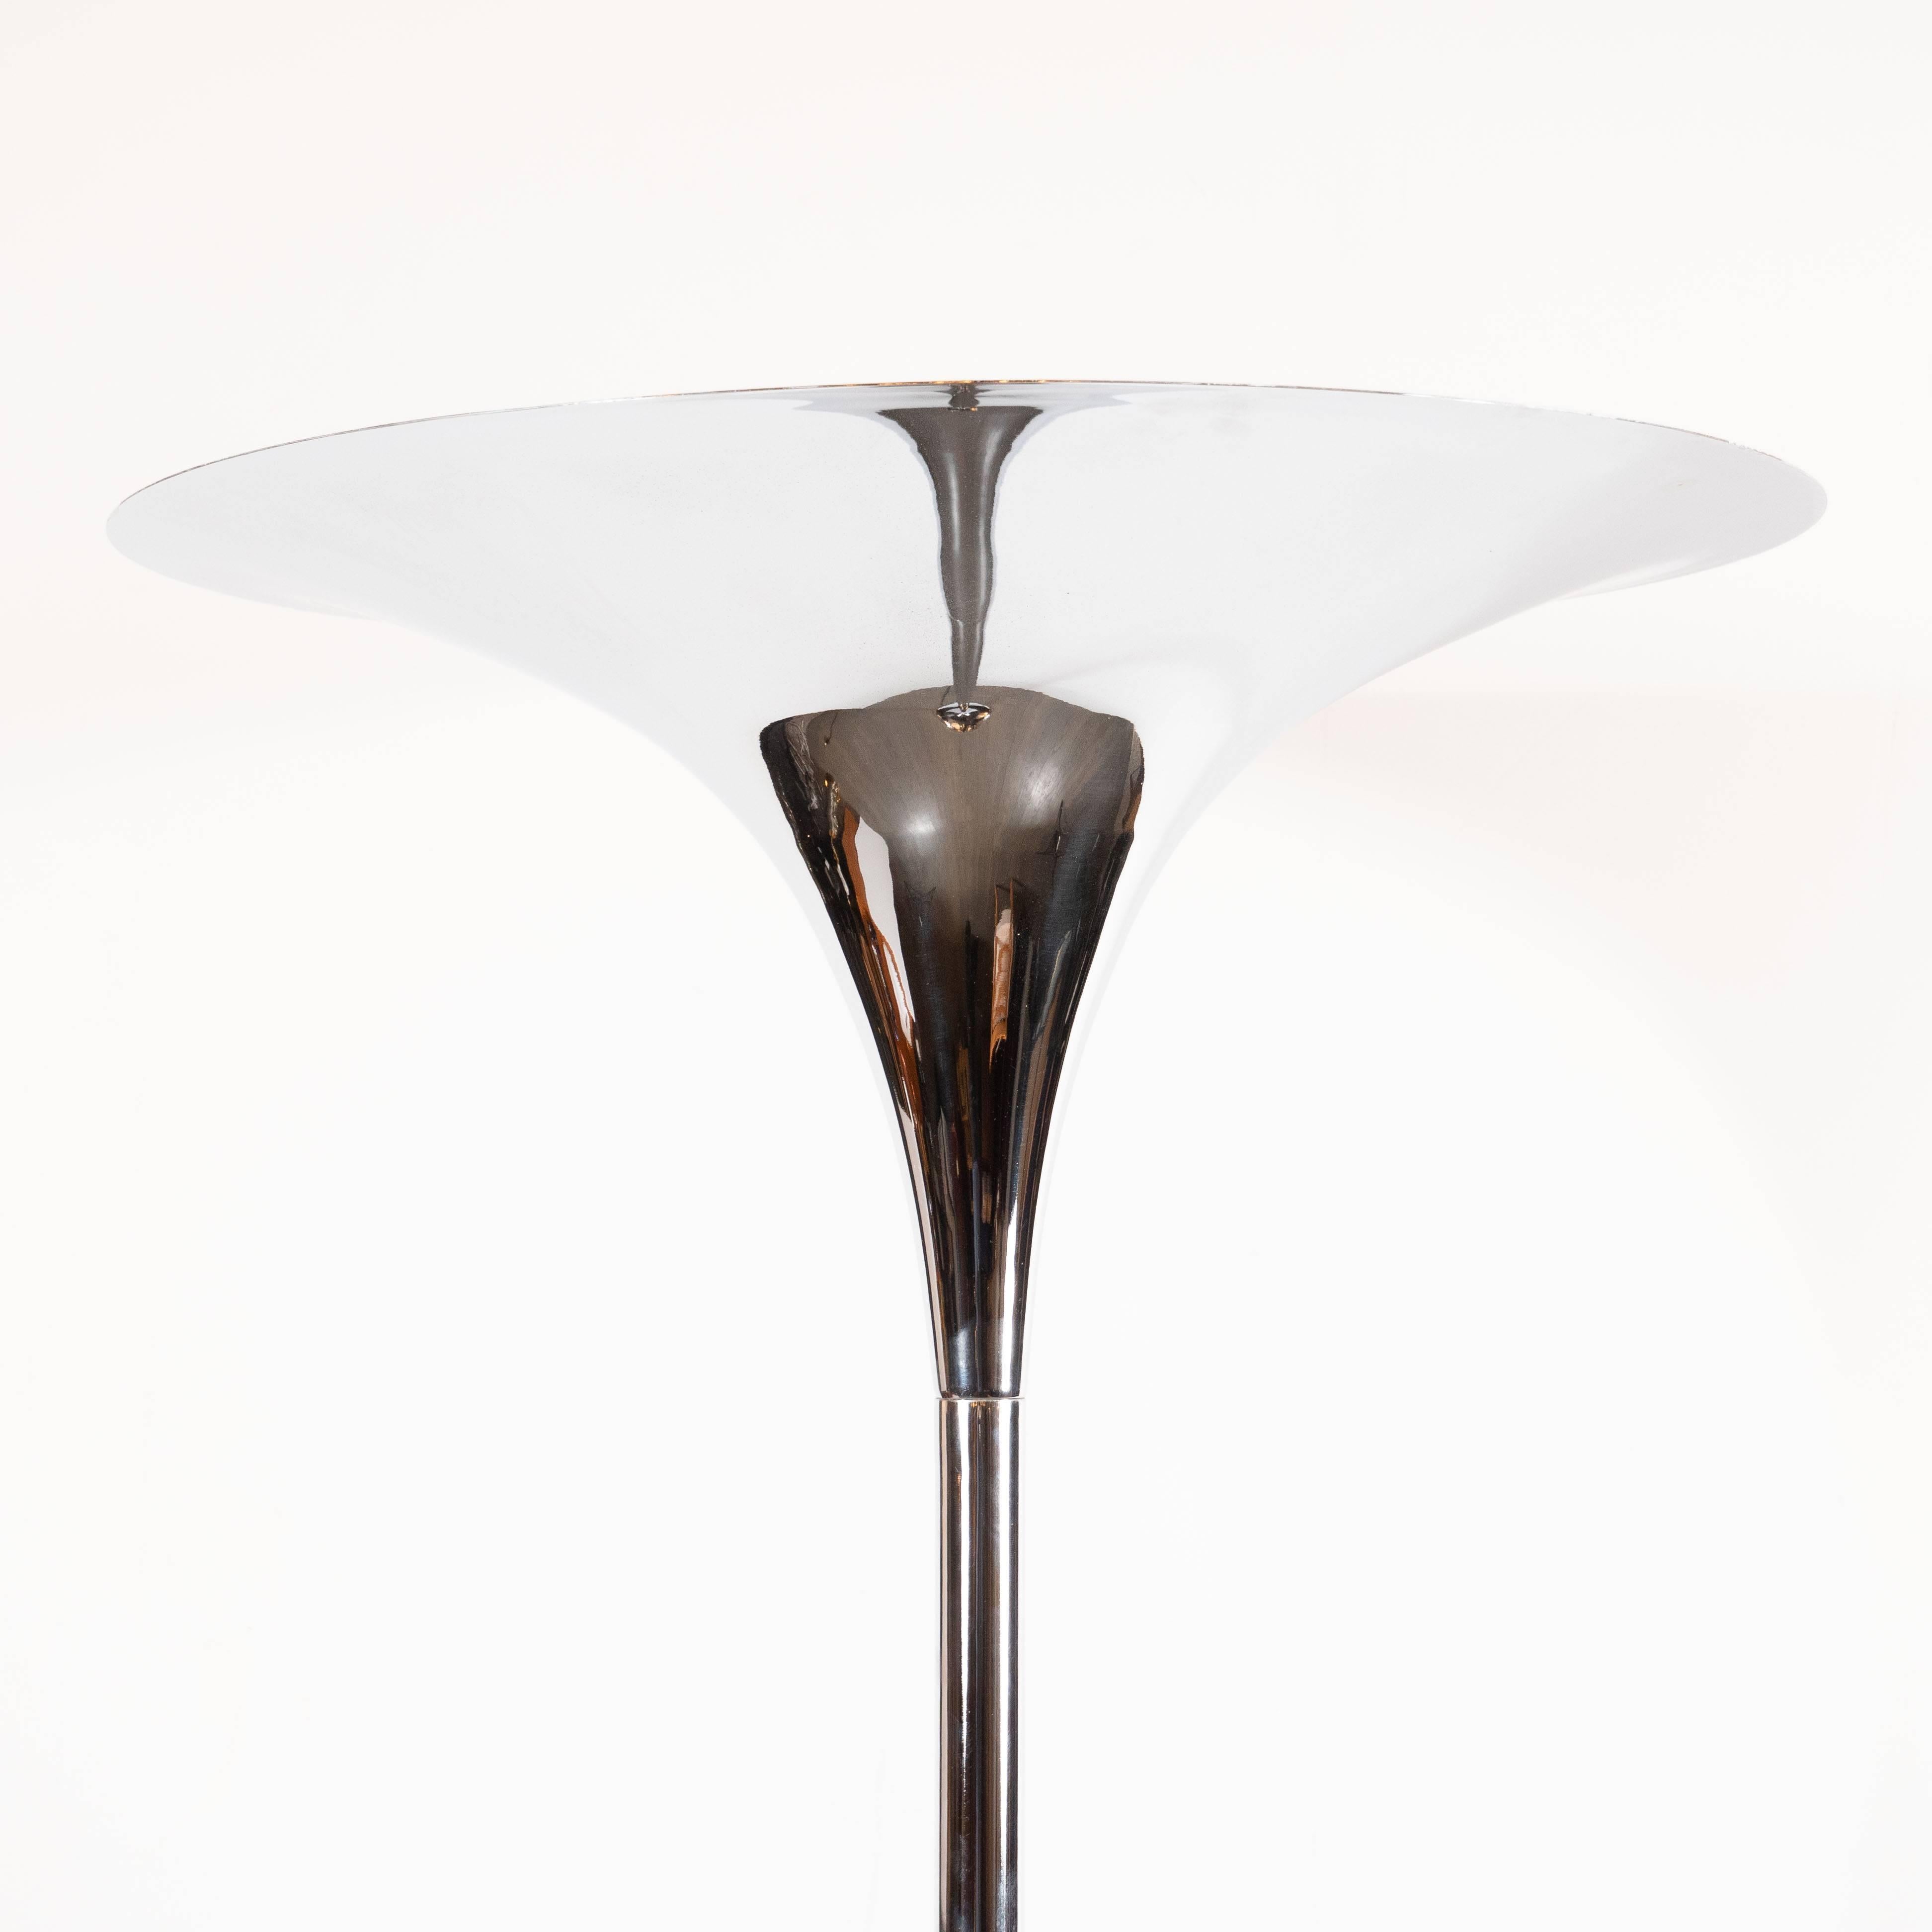 Late 20th Century Mid-Century Modern Curvilinear and Sculptural Tulip Lamp in Lustrous Chrome